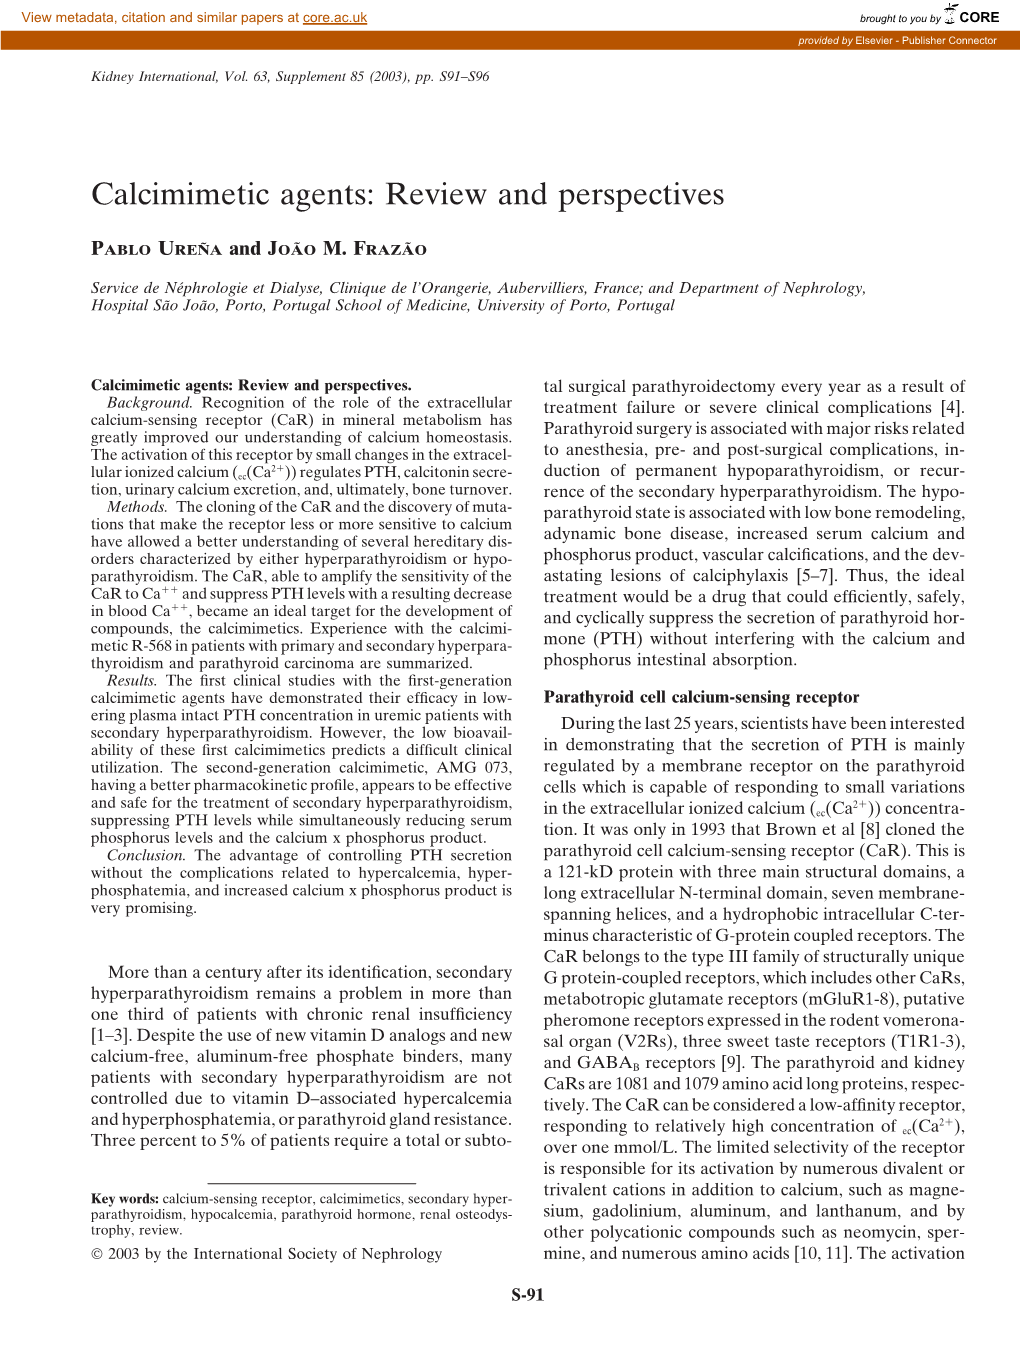 Calcimimetic Agents: Review and Perspectives